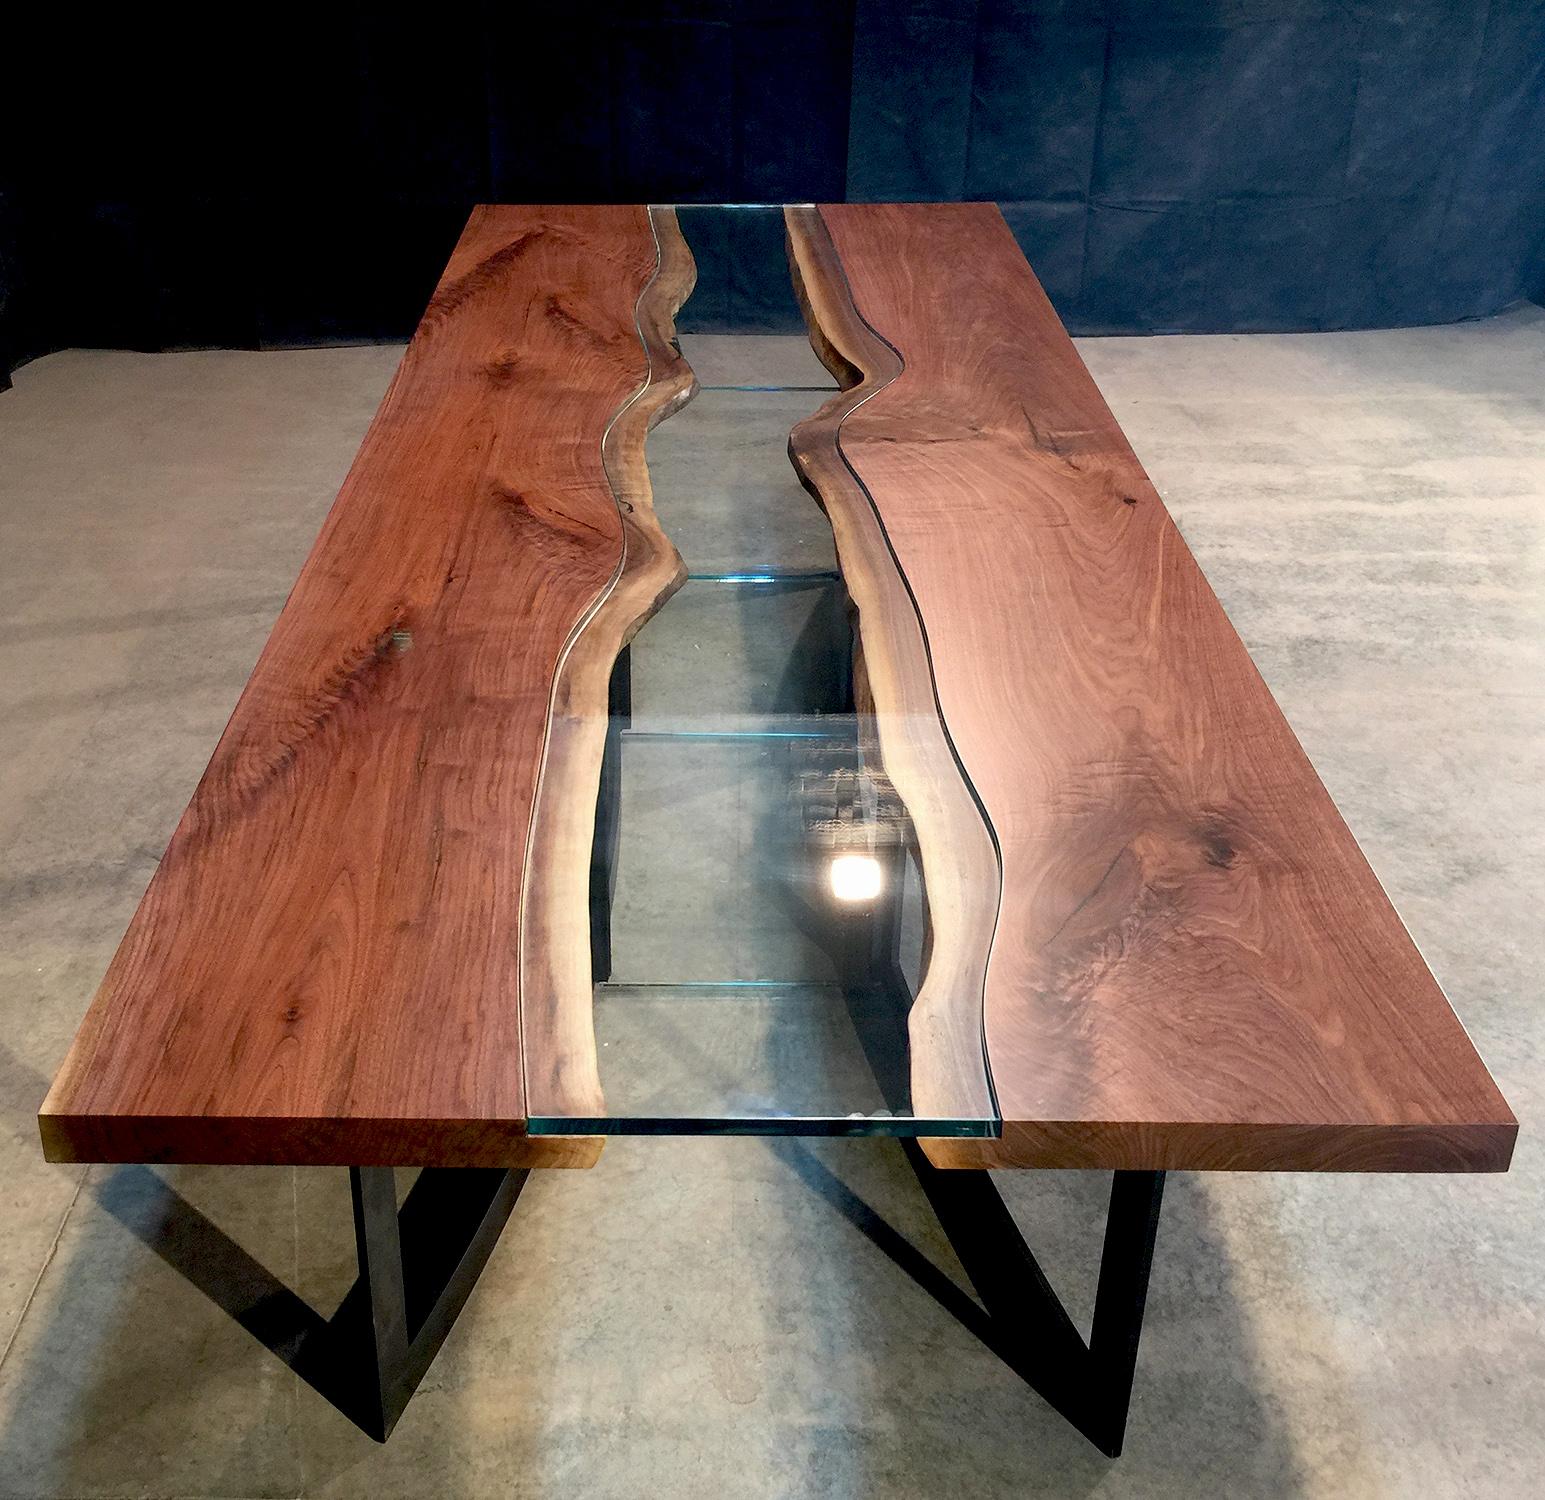 Dining table 2 1/4? live edge black walnut and 3/4? glass center with bronze patina steel base.